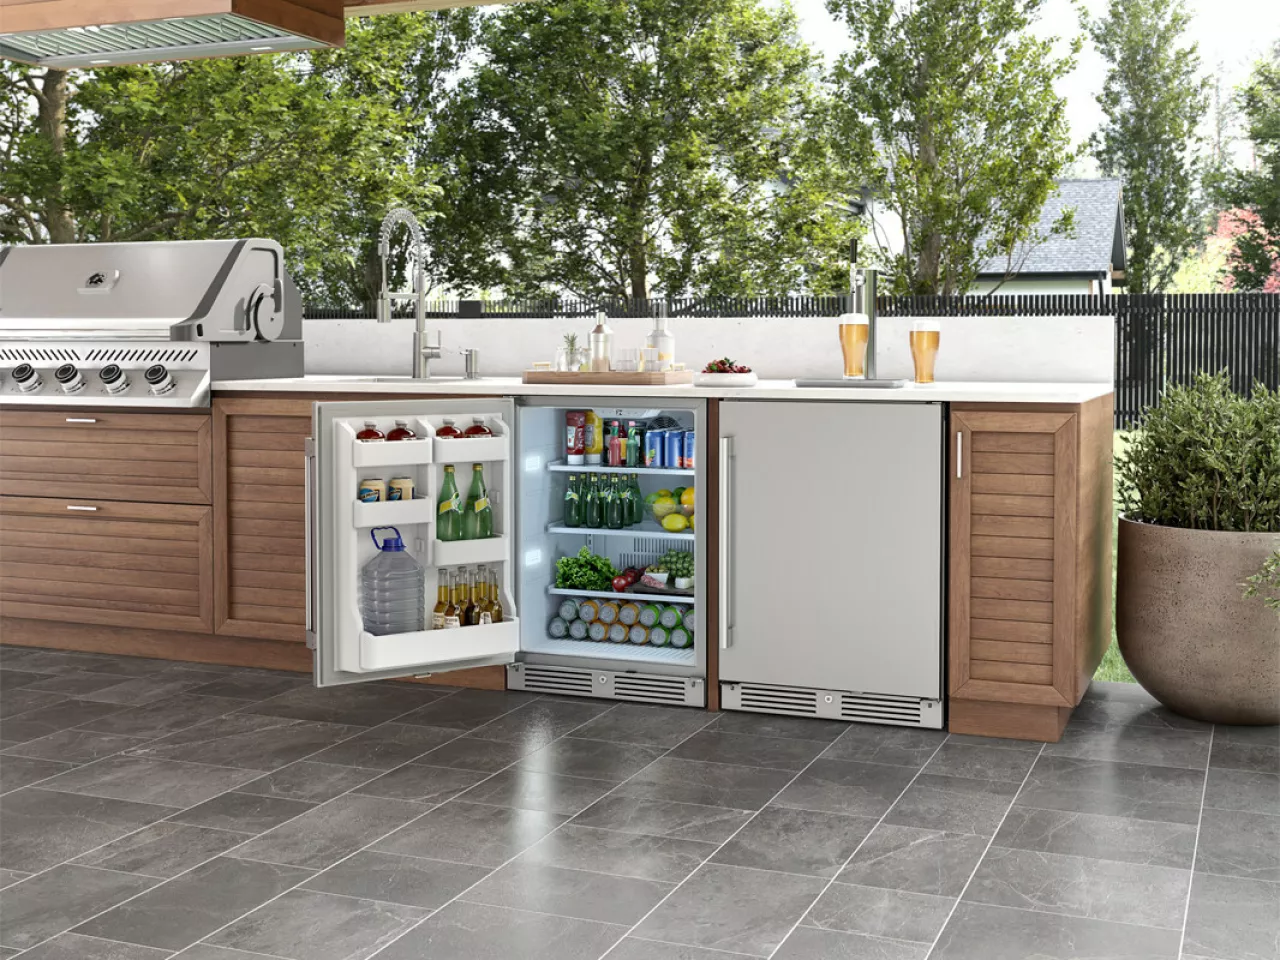 The ultimate appliance for outdoor entertaining, the Presrv Outdoor Refrigerator is ideal for storing appetizers, food for the grill, and fruit garnishes for drinks and snacks. img#1